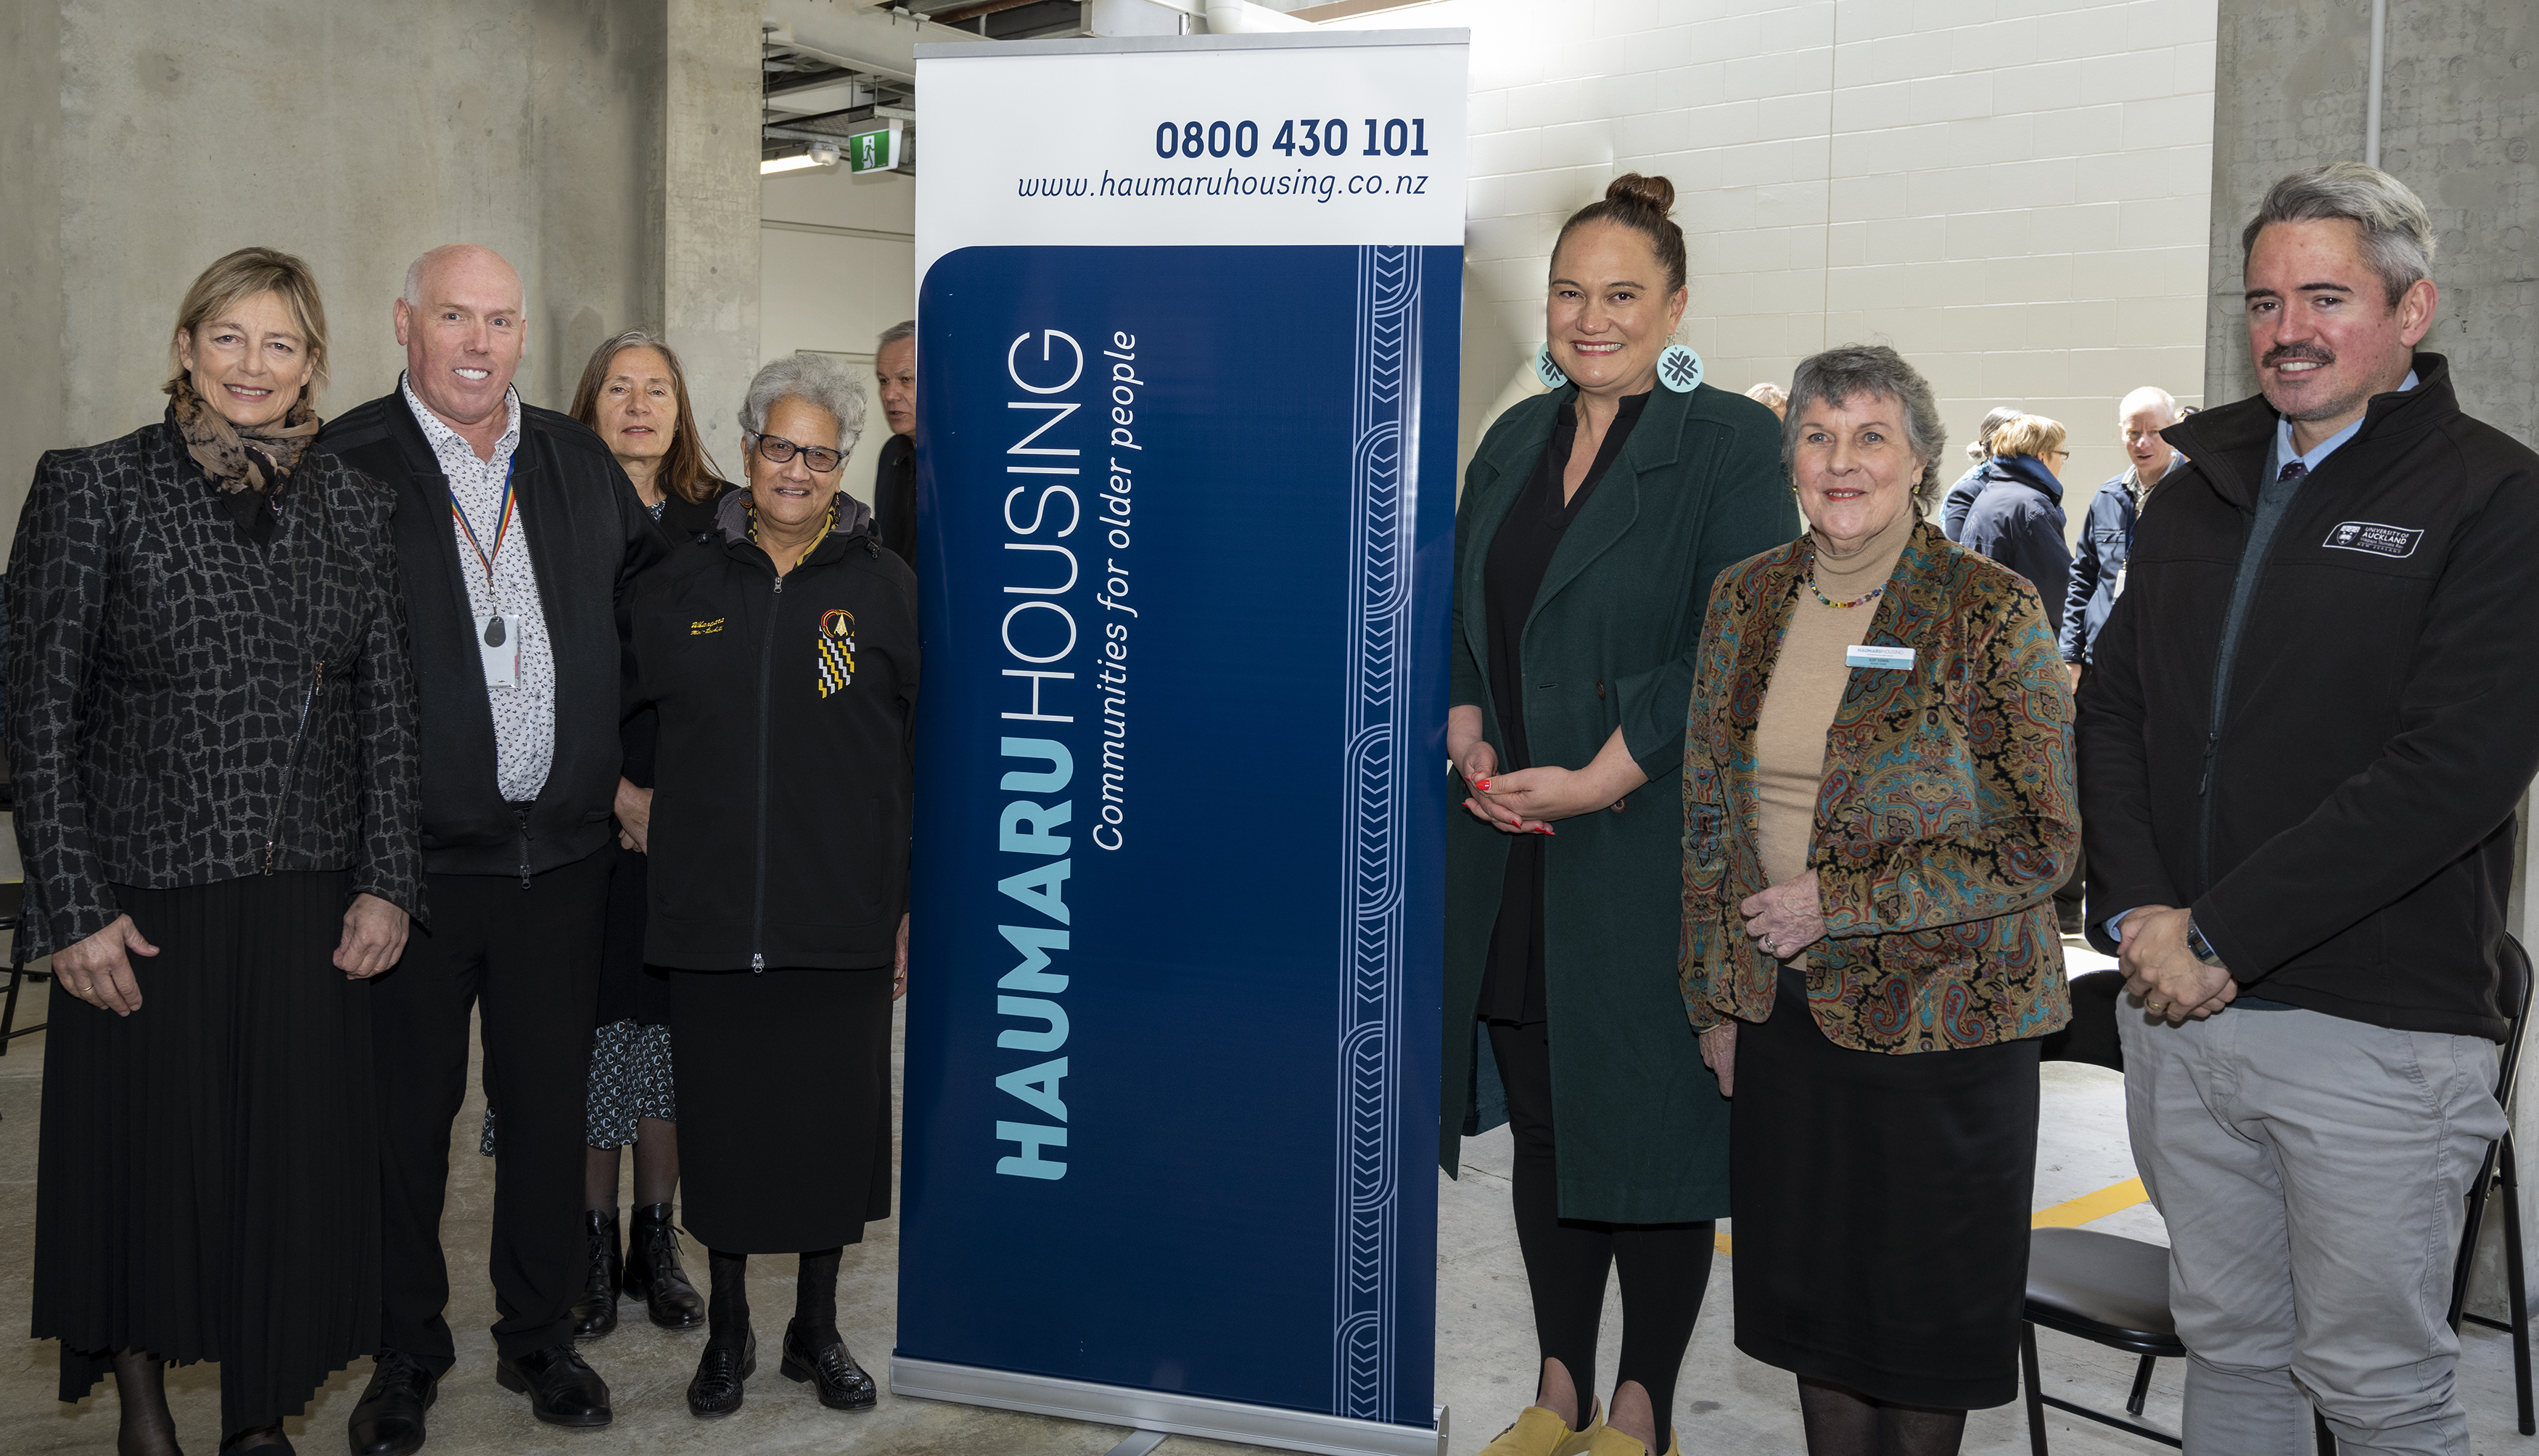 Pictured at the opening ceremony are: (from left), Haumaru Housing Board Member Dr Sue Watson, Kāinga Ora Programme Director Nick Seymour, Haumaru Housing GM Operations Gillian Schweizer, a Haumaru Housing tenant Ope Maxwell, Minister Carmel Sepuloni, Haumaru Housing Board Chair Dr Kay Hawk and Minister with the Haahi Mhingare (Maaori Anglican Church) Geremy Hema.